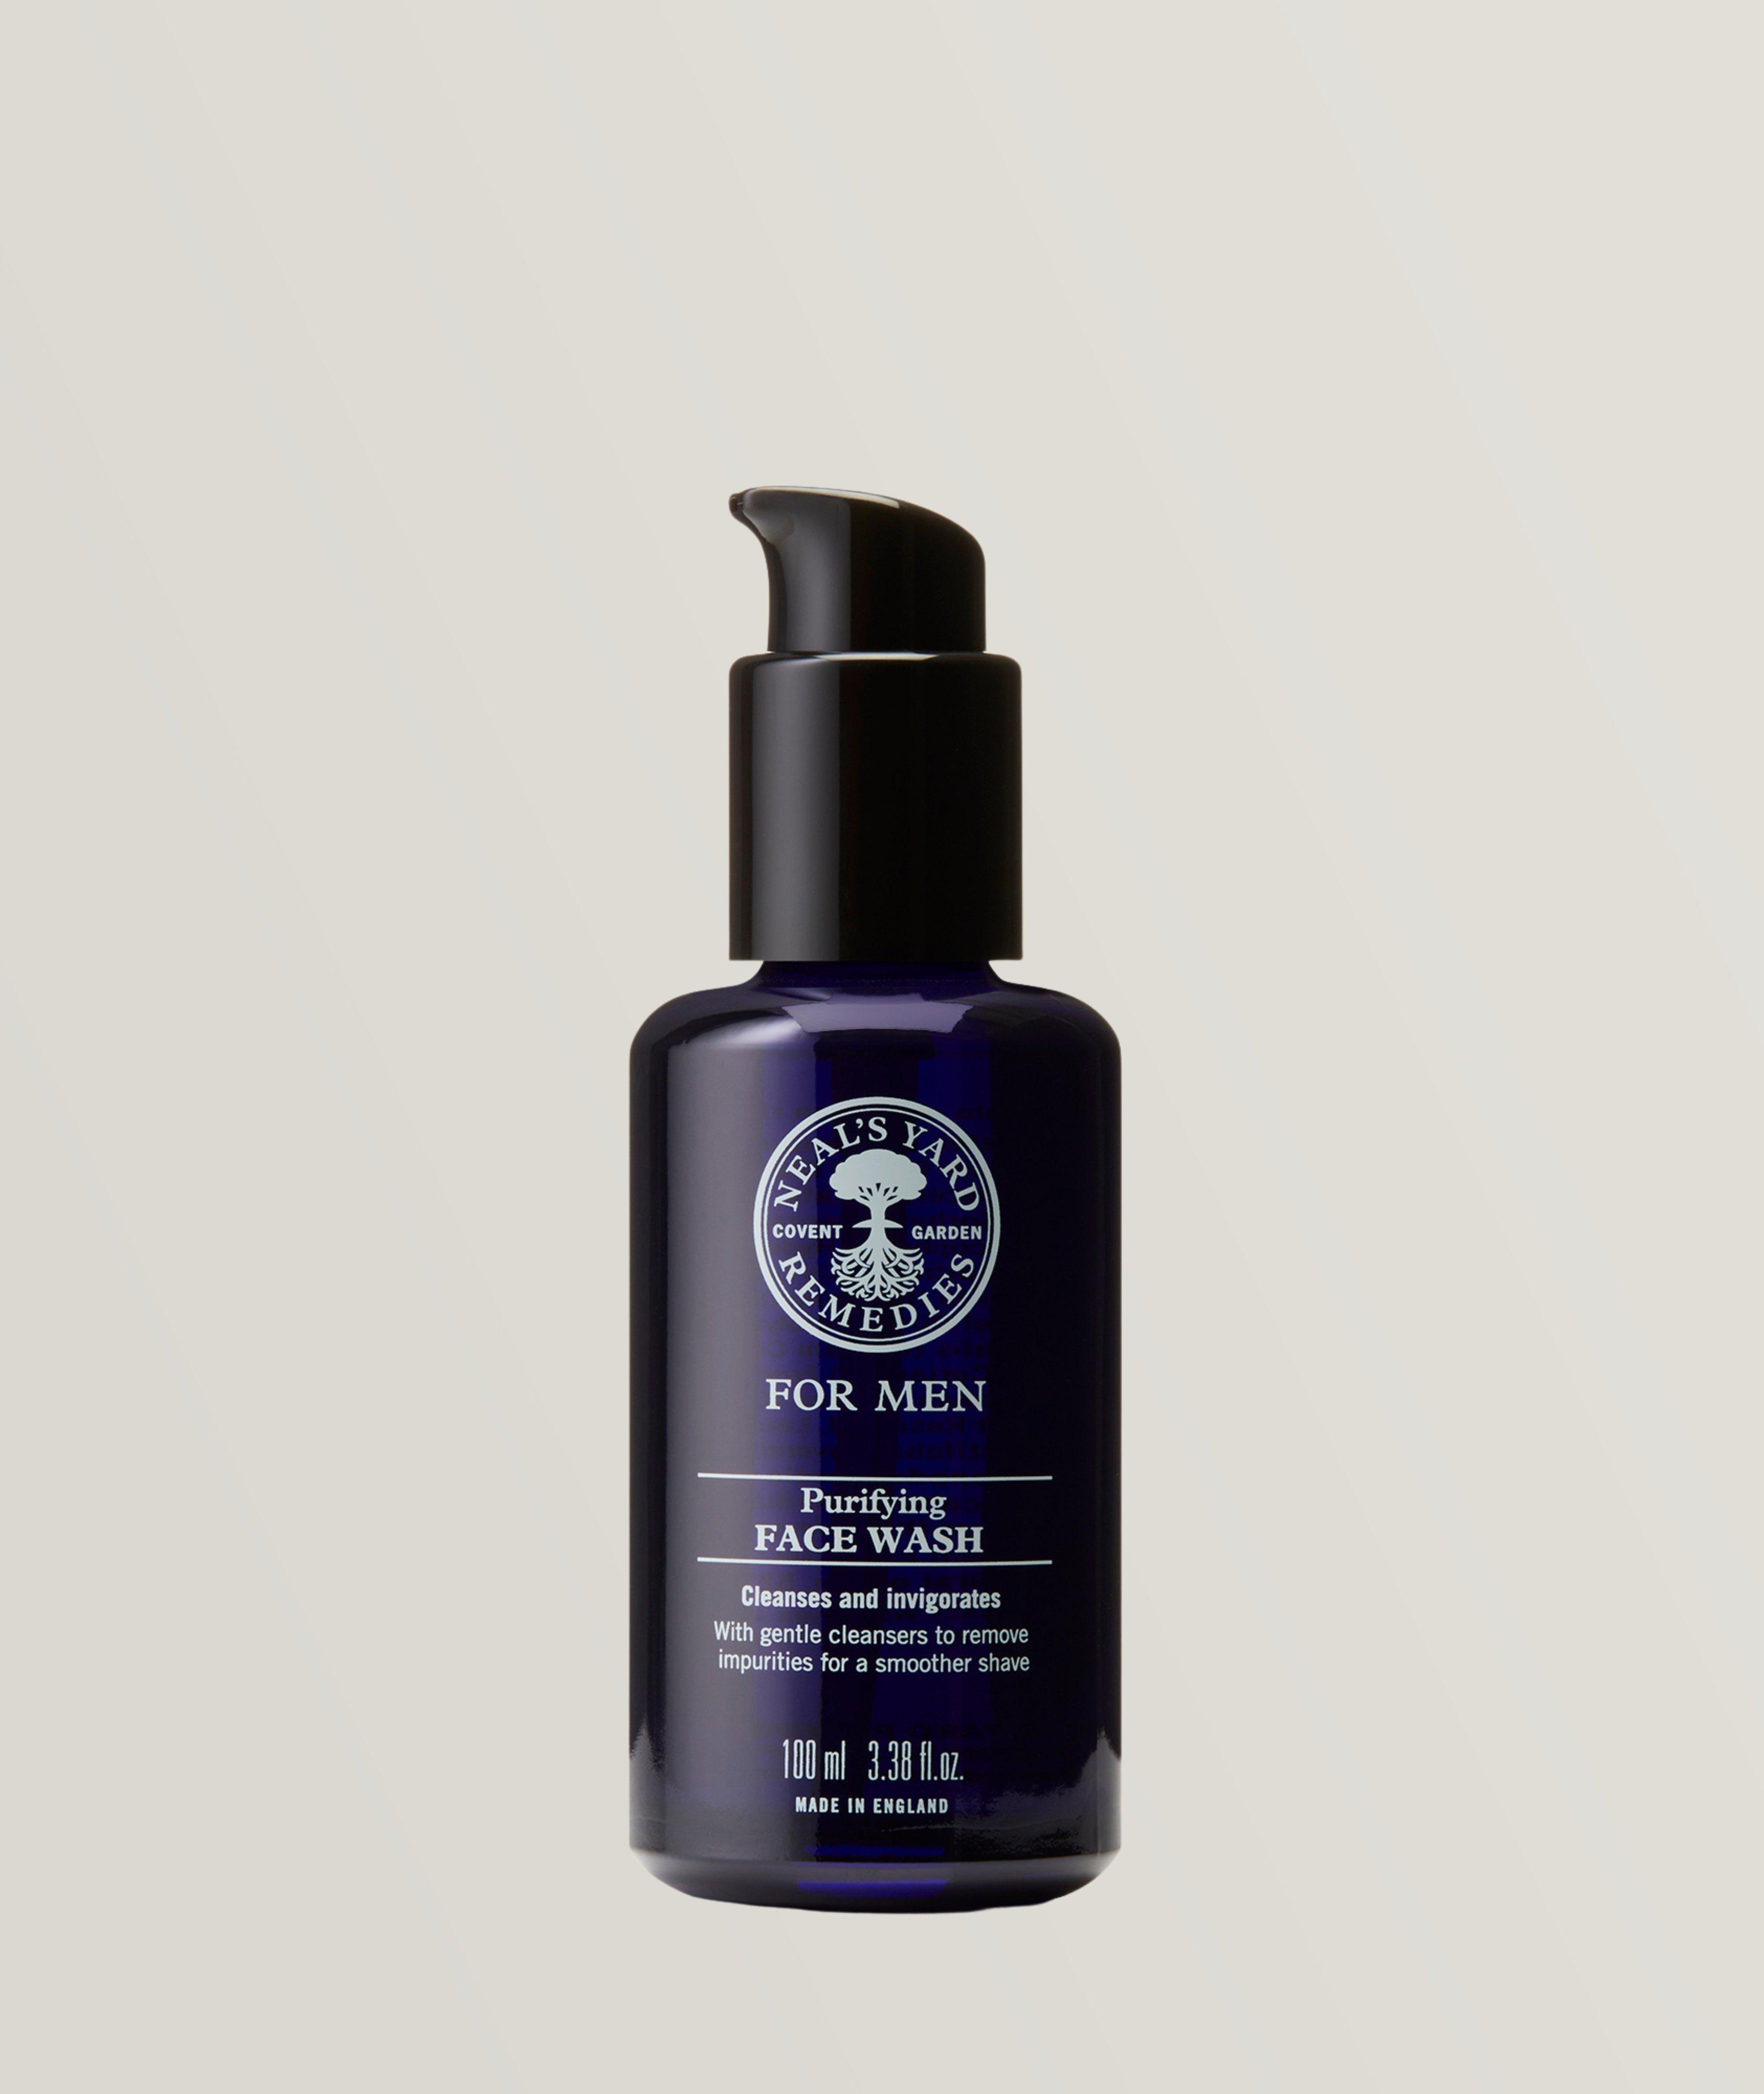 Neal's Yard Remedies Purifying Face Wash